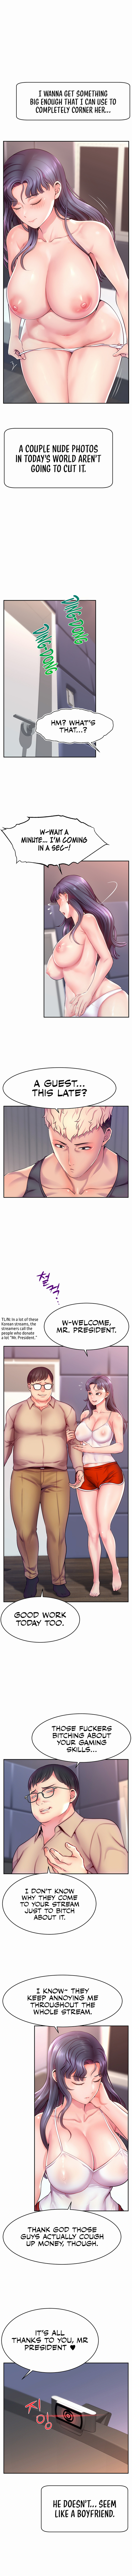 [Ohhhhhk, Boss Racoon] Making Friends With Streamers by Hacking! (1-16) [English] [Omega Scans] [Ongoing] - Page 6